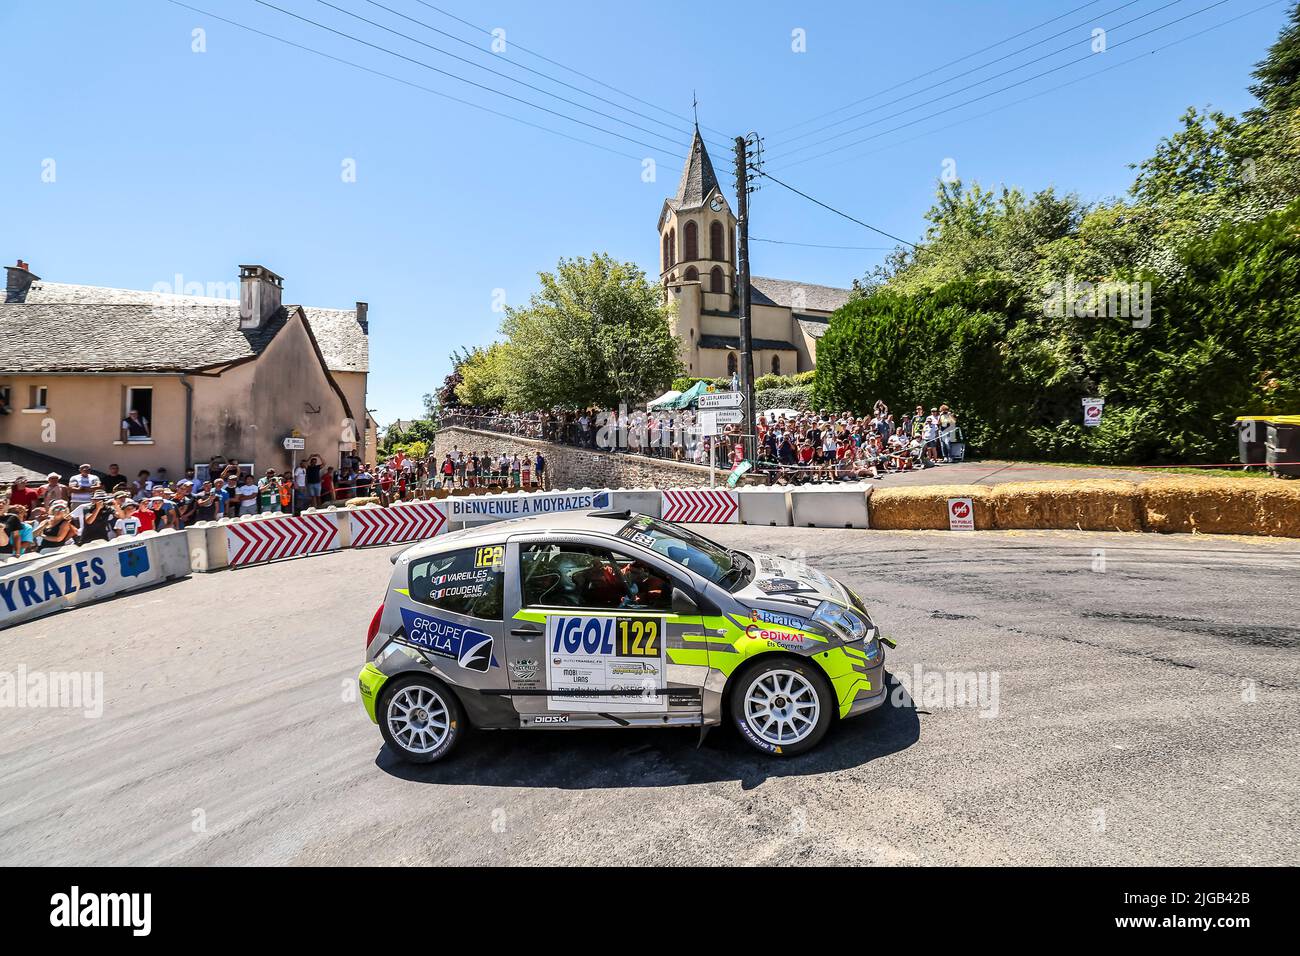 122 COUDENE Arnaud, VAREILLES Julie, Citroën C2, action during the Rallye Aveyron Rouergue Occitanie 2022, 5th round of the Championnat de France des Rallyes 2022, from July 7 to 9 in Rodez, France - Photo Gregory Lenormand / DPPI Stock Photo